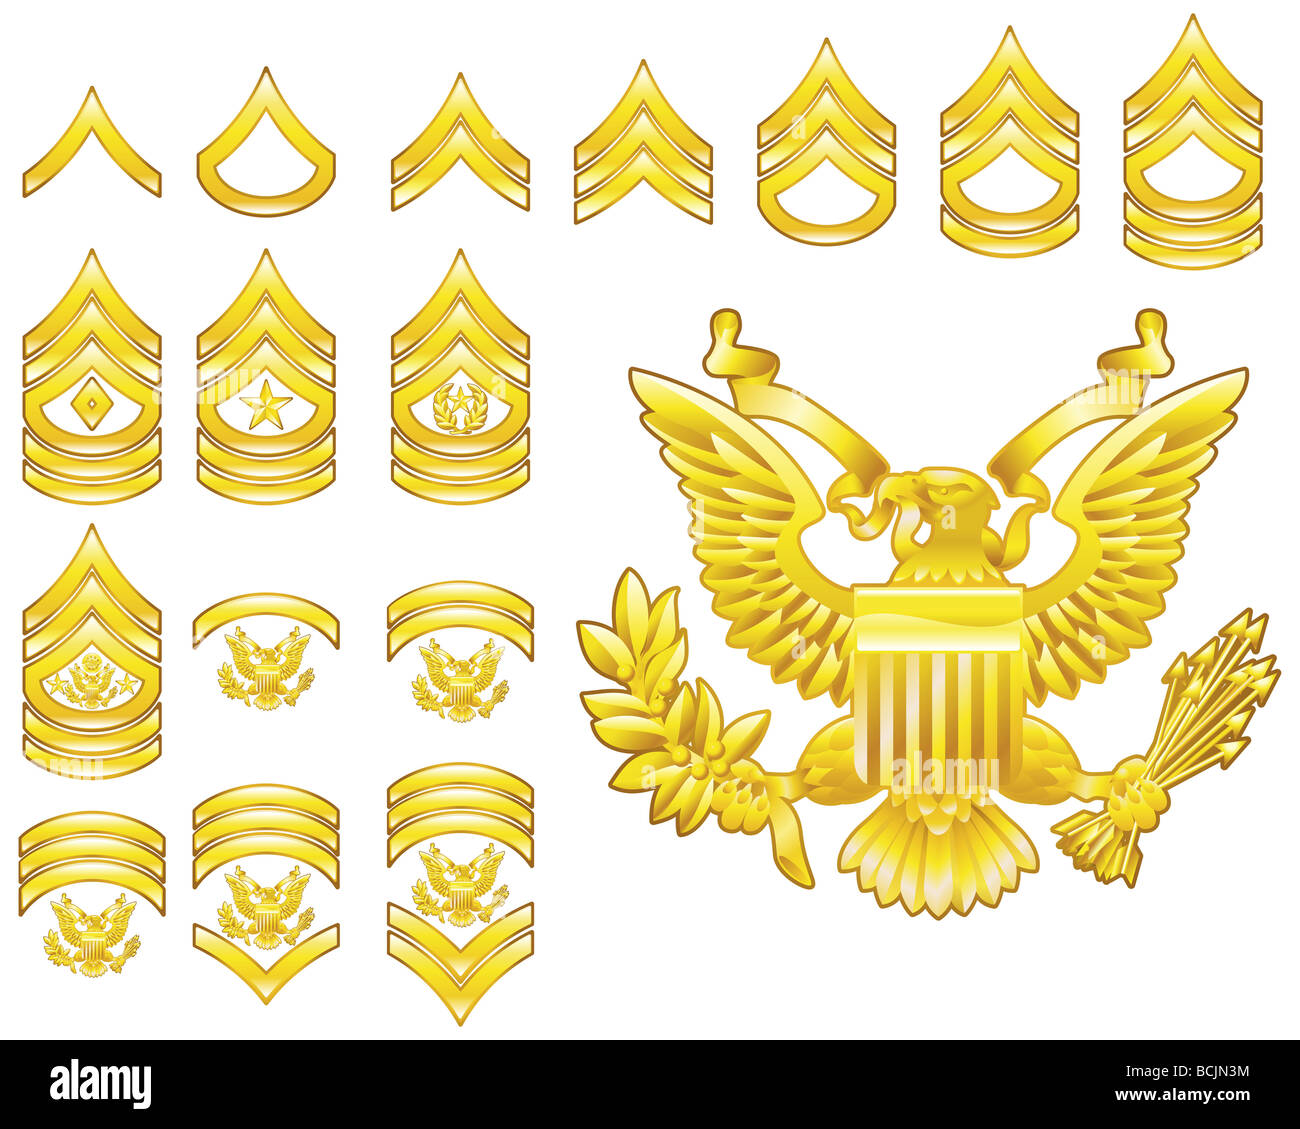 Set of military american army enlisted rank insignia icons Stock Photo